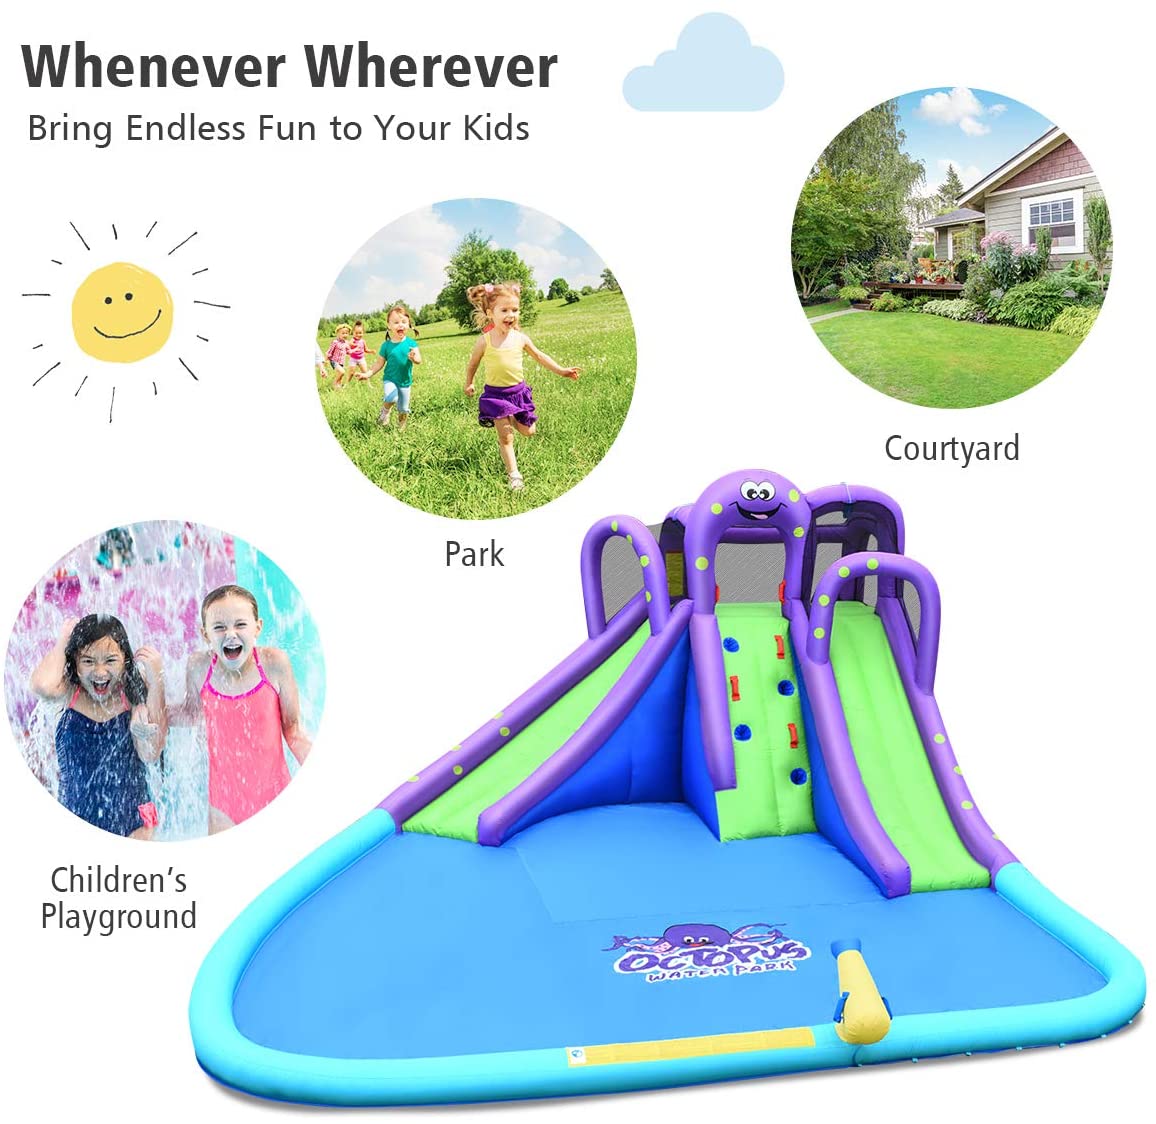 BOUNTECH Inflatable Water Park, Mighty Bounce House w: Large Splash Pool, Climbing Wall, Double Slides, Water Cannon, Netting, Including Carry Bag, Repair...